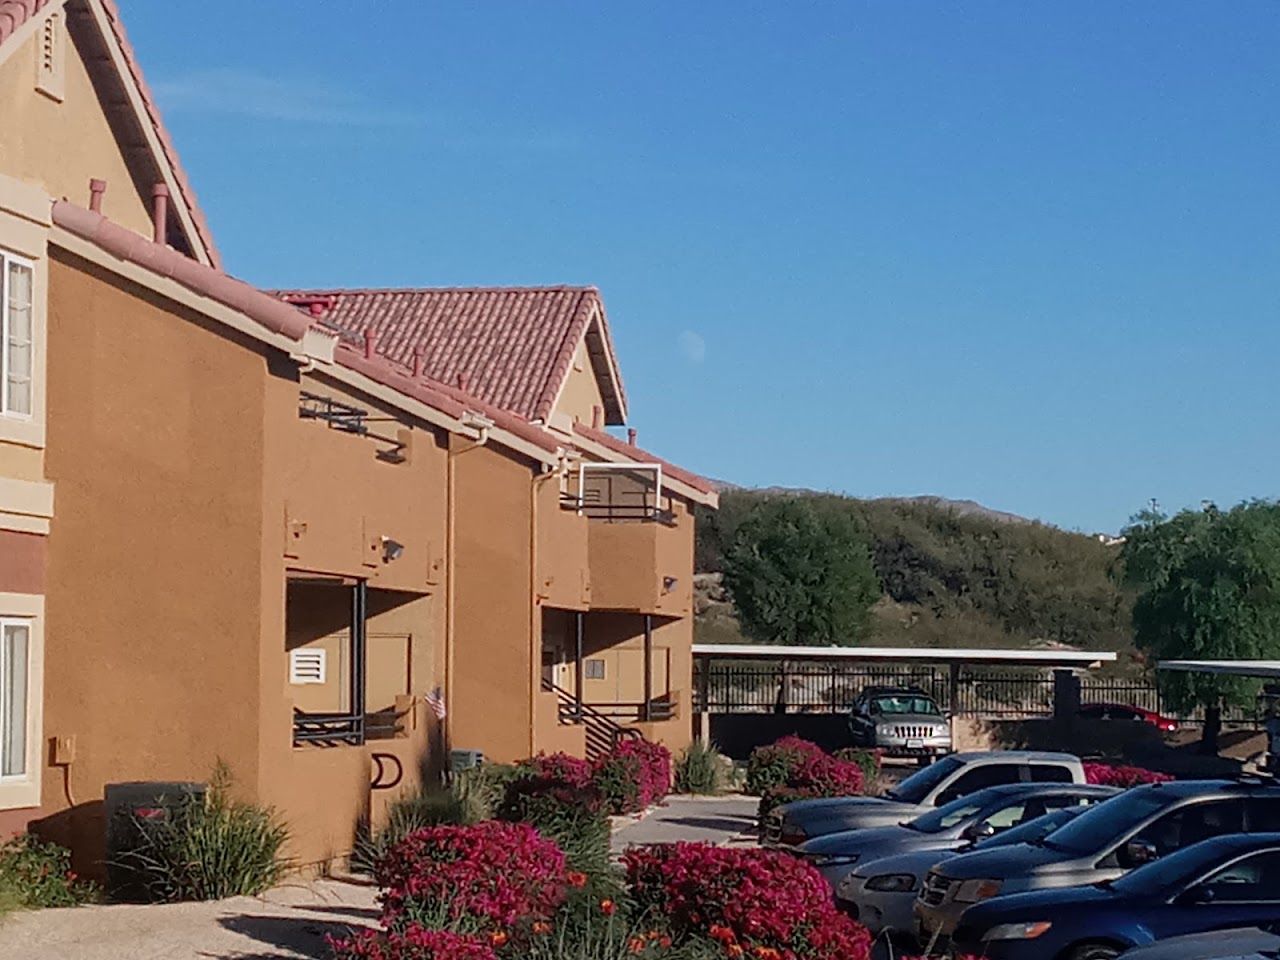 Photo of VERBENA CROSSING APTS. Affordable housing located at 66950 IRONWOOD DR DESERT HOT SPRINGS, CA 92240